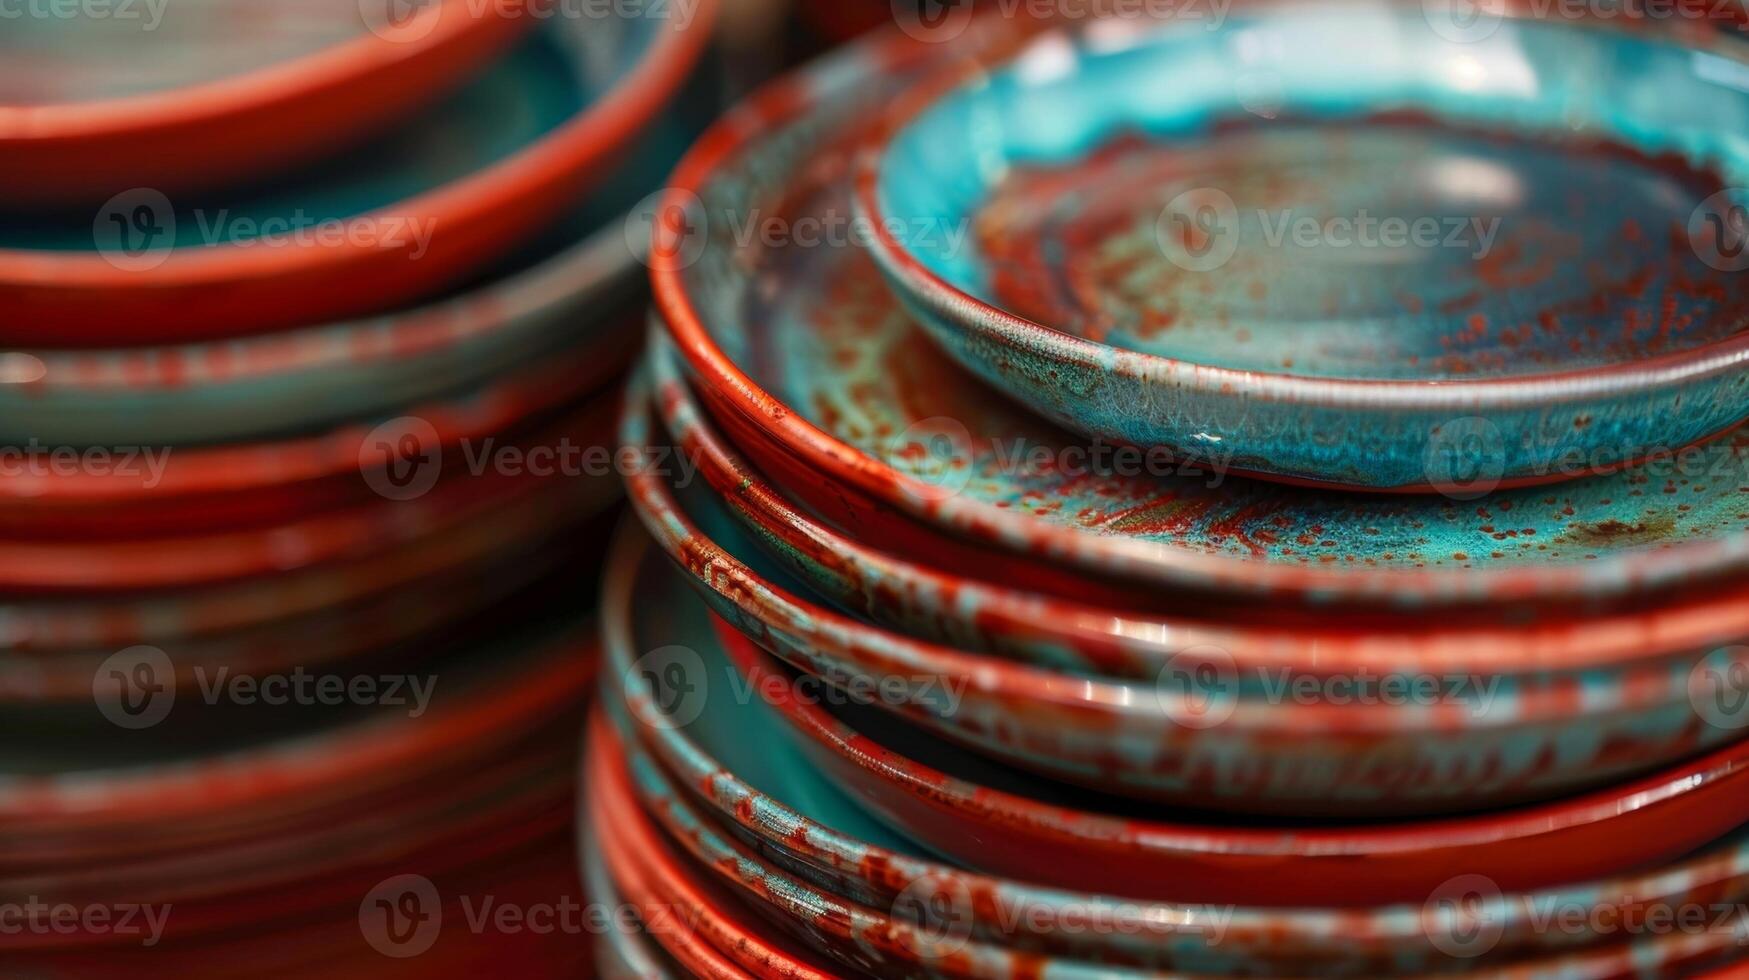 A stack of plates their glossy surfaces showcasing a beautiful blend of turquoise and deep red created through soda firing. photo